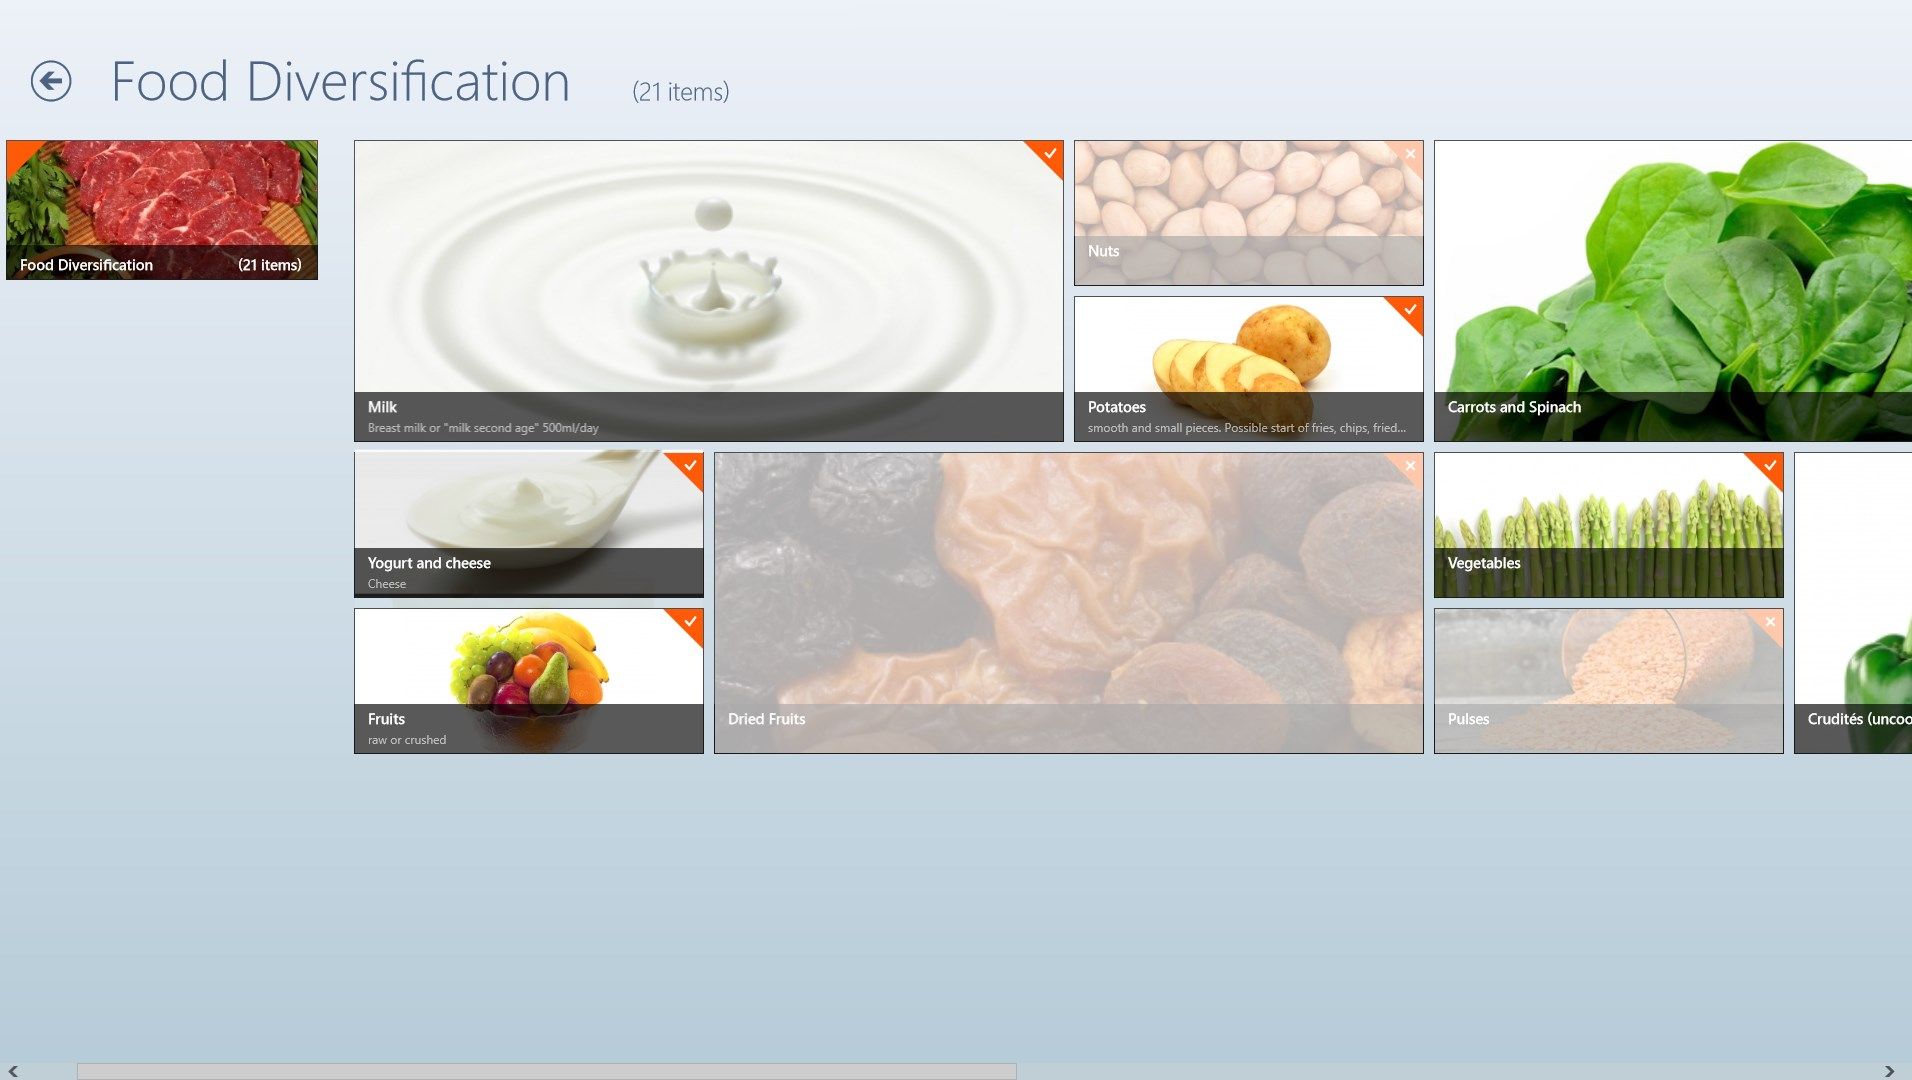 Application's main page showing a grouping of all food types categories.